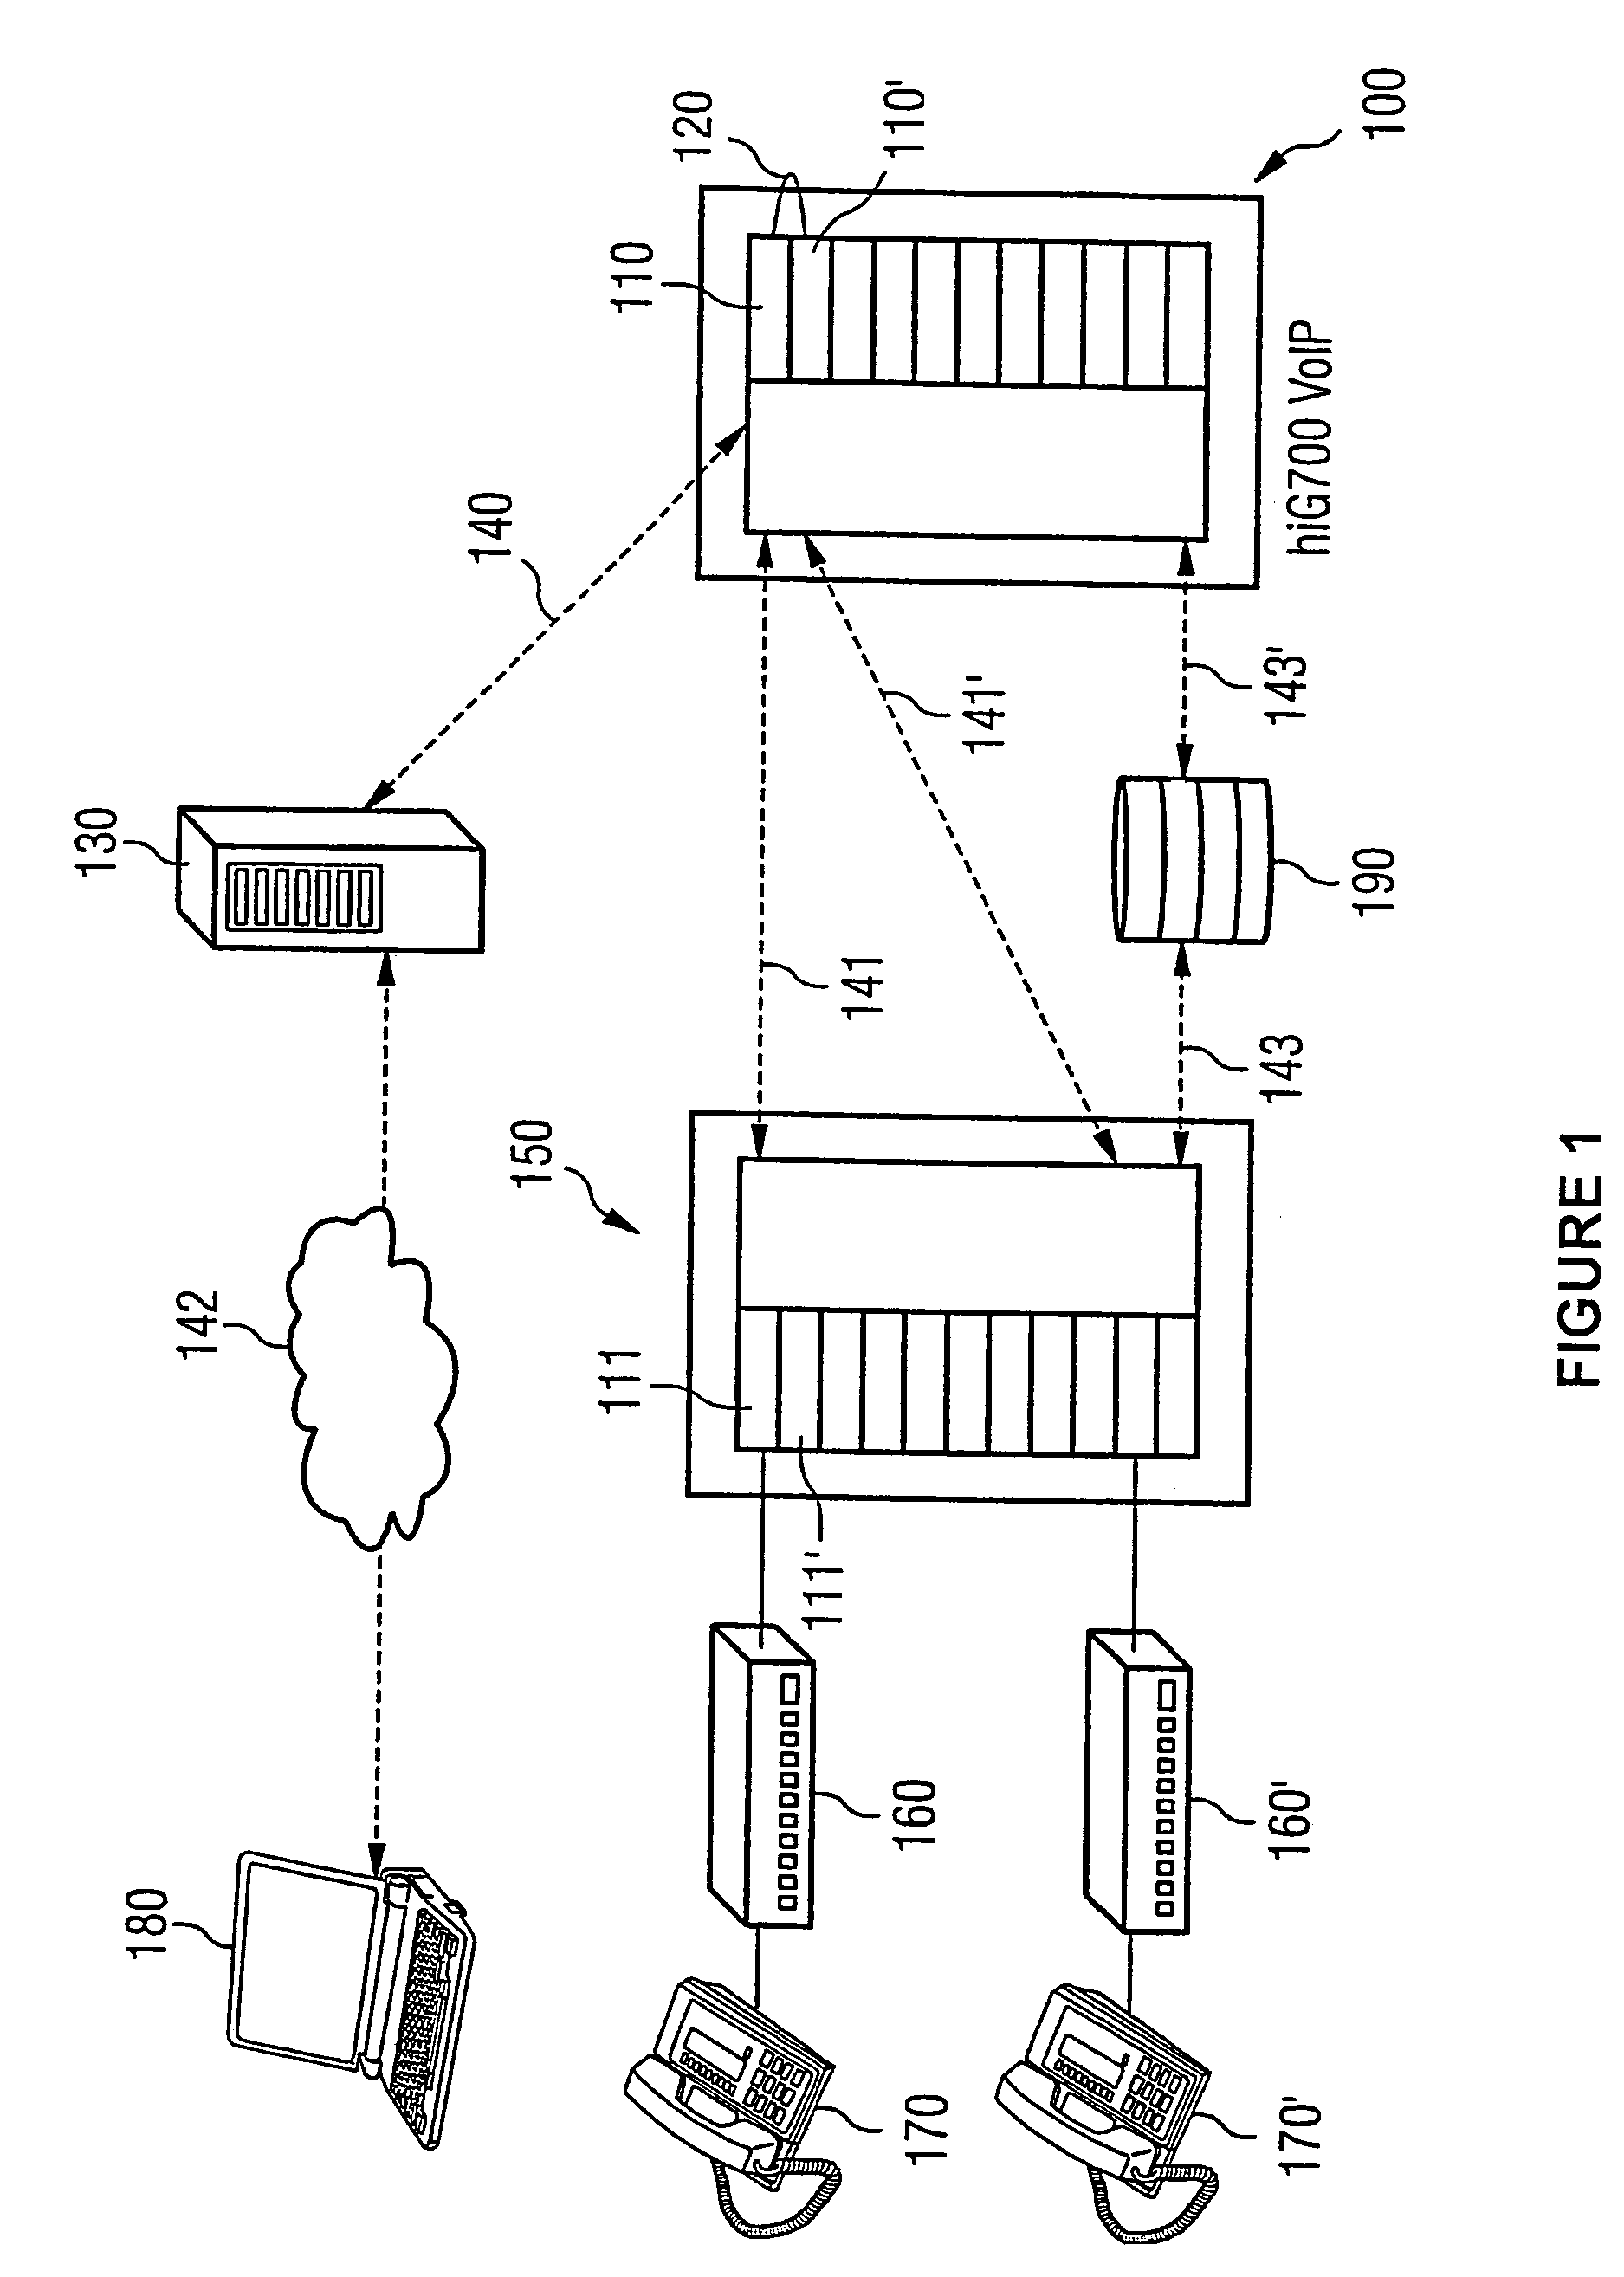 System and method for switching a connection